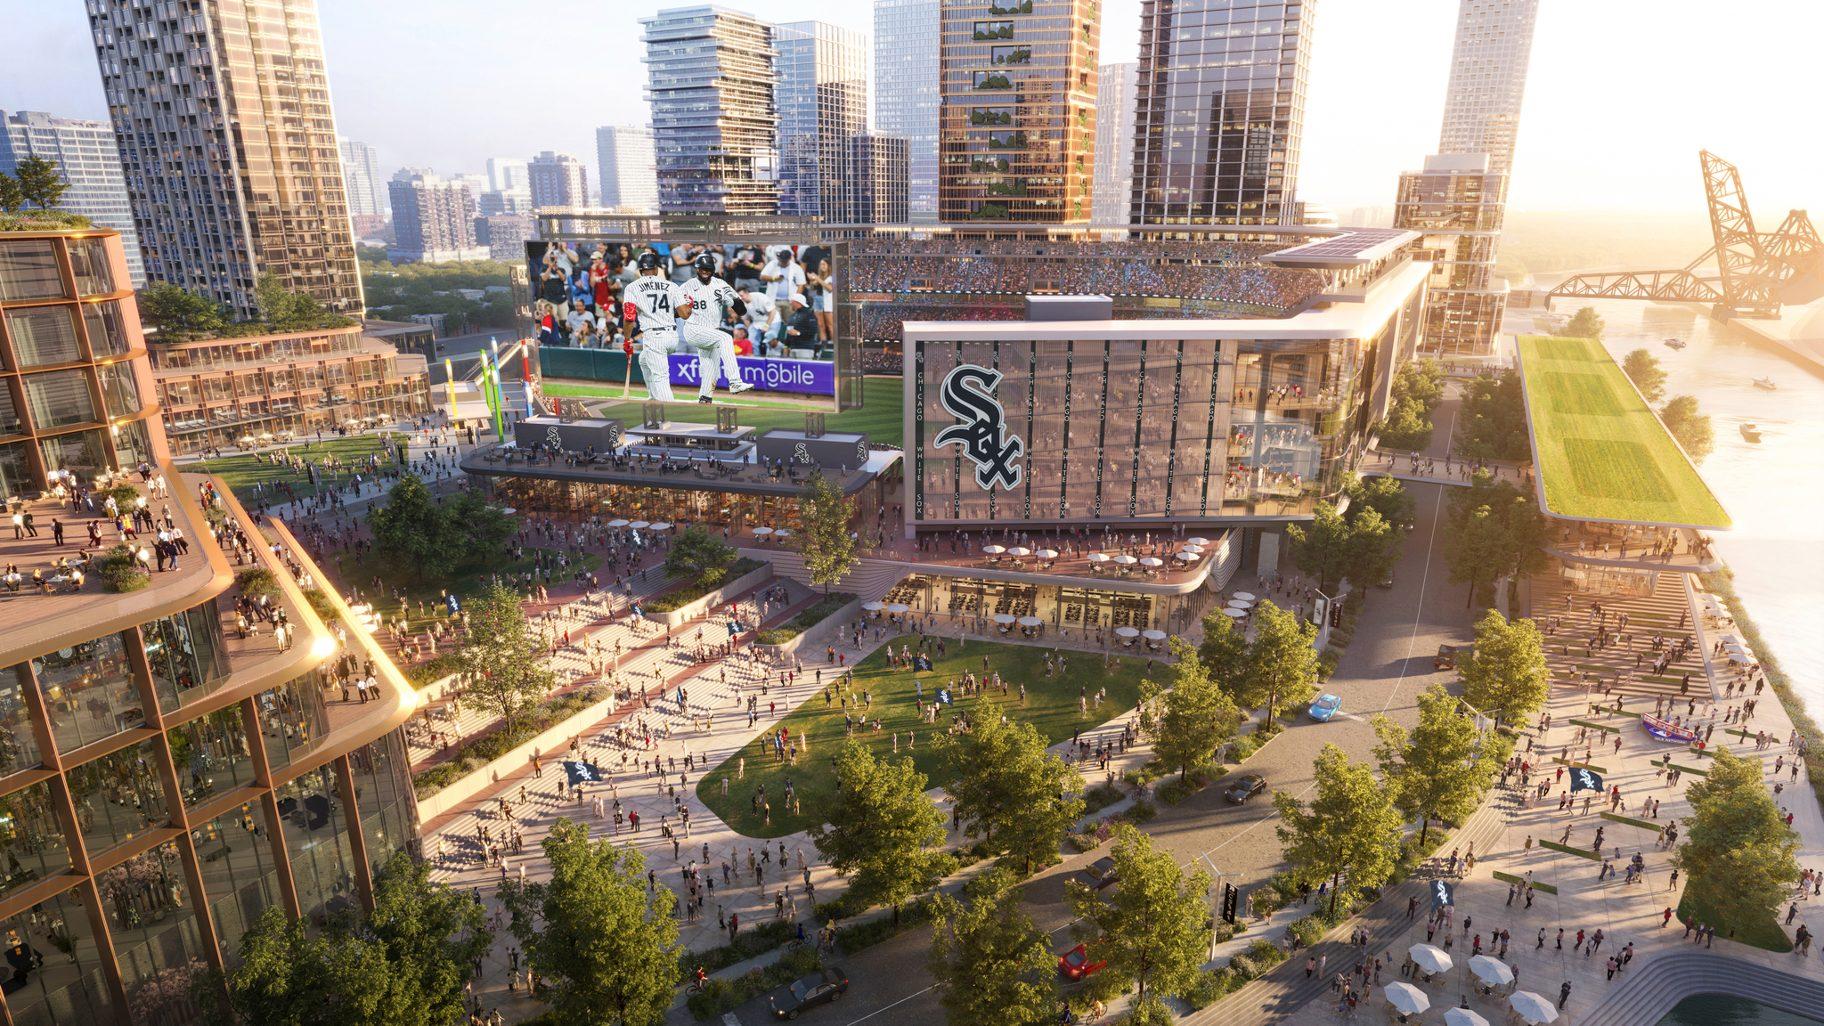 A rendering of a White Sox stadium at The 78 site with additional development. (Credit: Related Midwest)